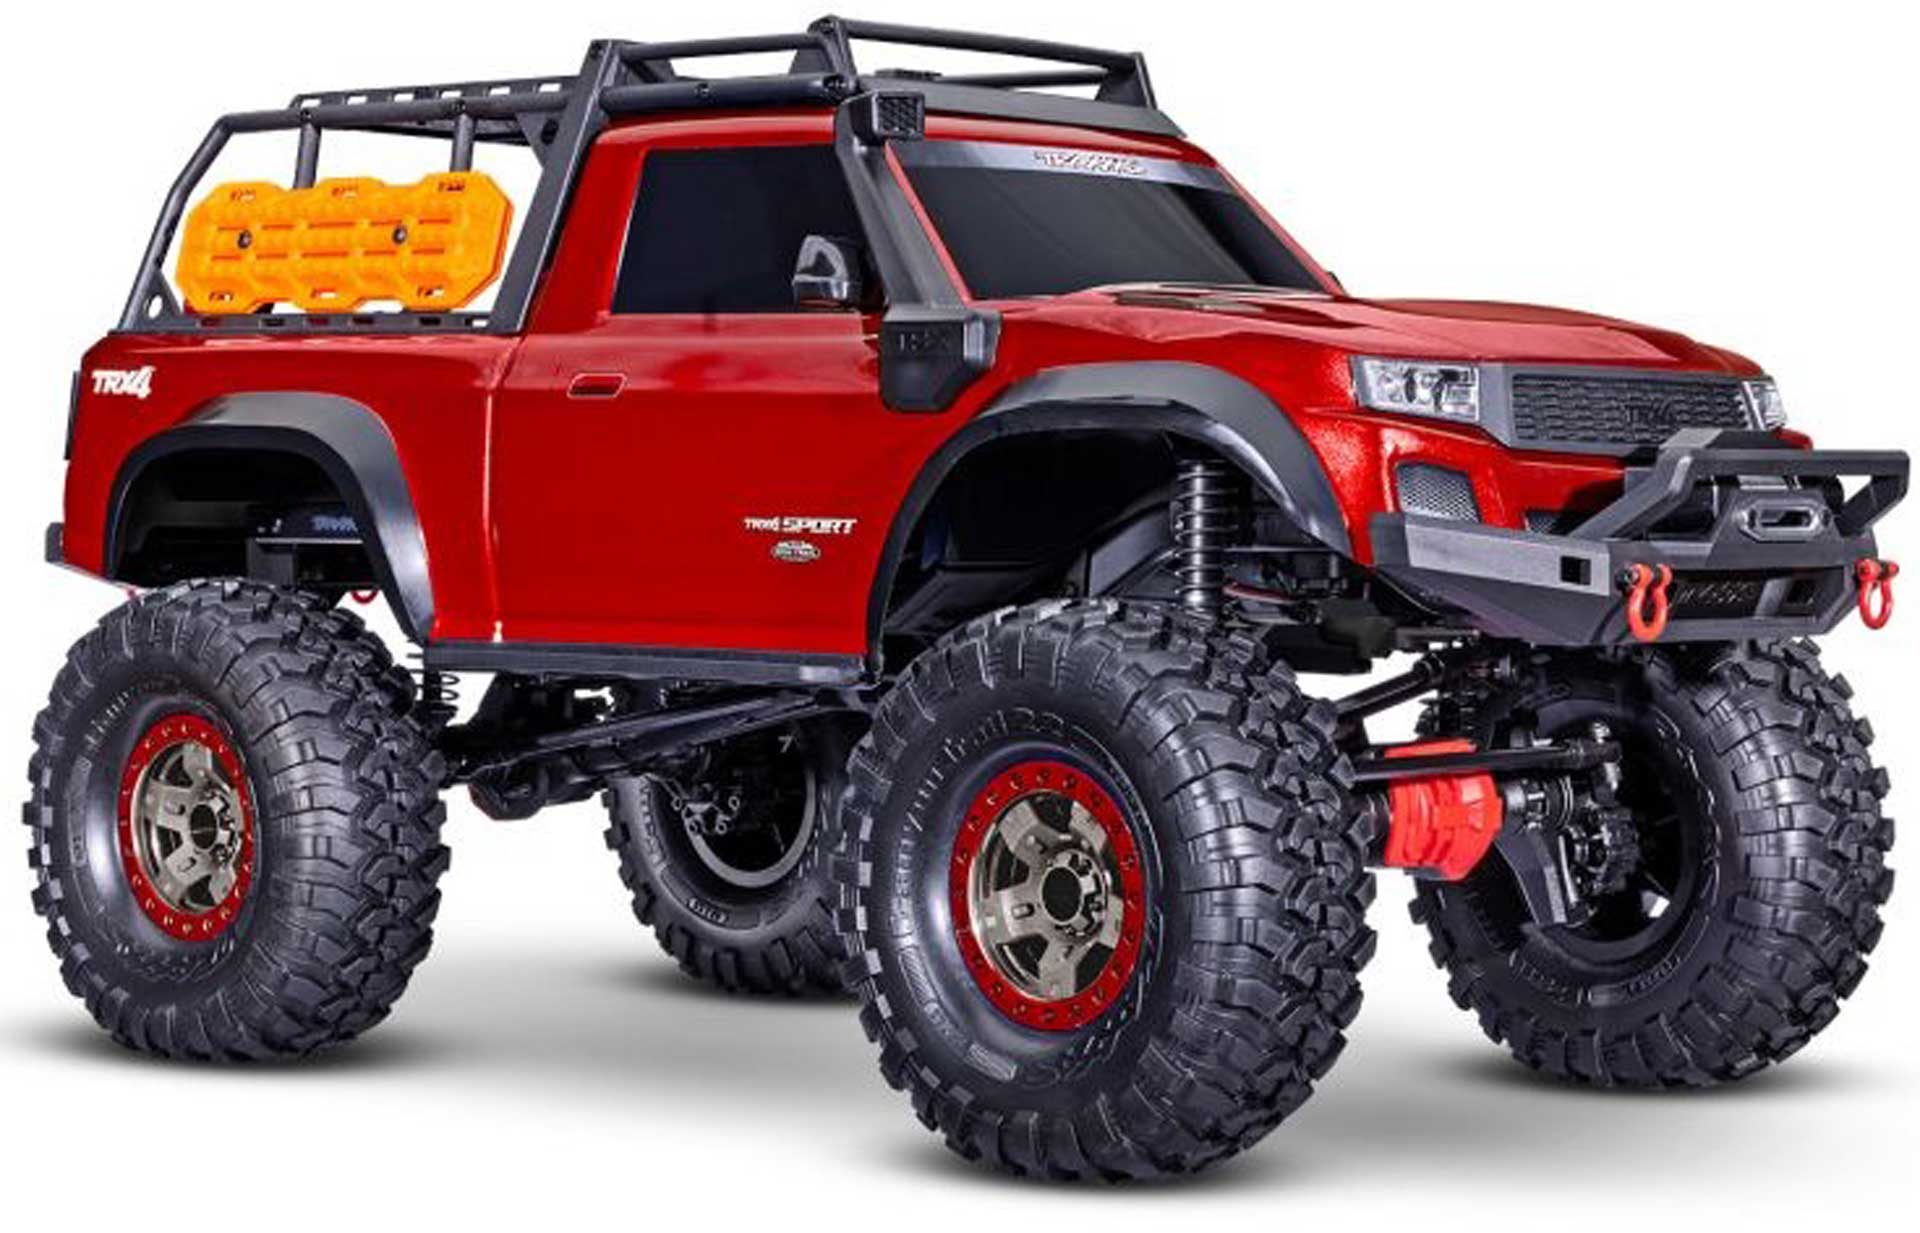 TRAXXAS TRX-4 SPORT HIGH TRAIL M-ROUGE 1/10 4WD SCALE-CRAWLER RTR BRUSHED, OHN